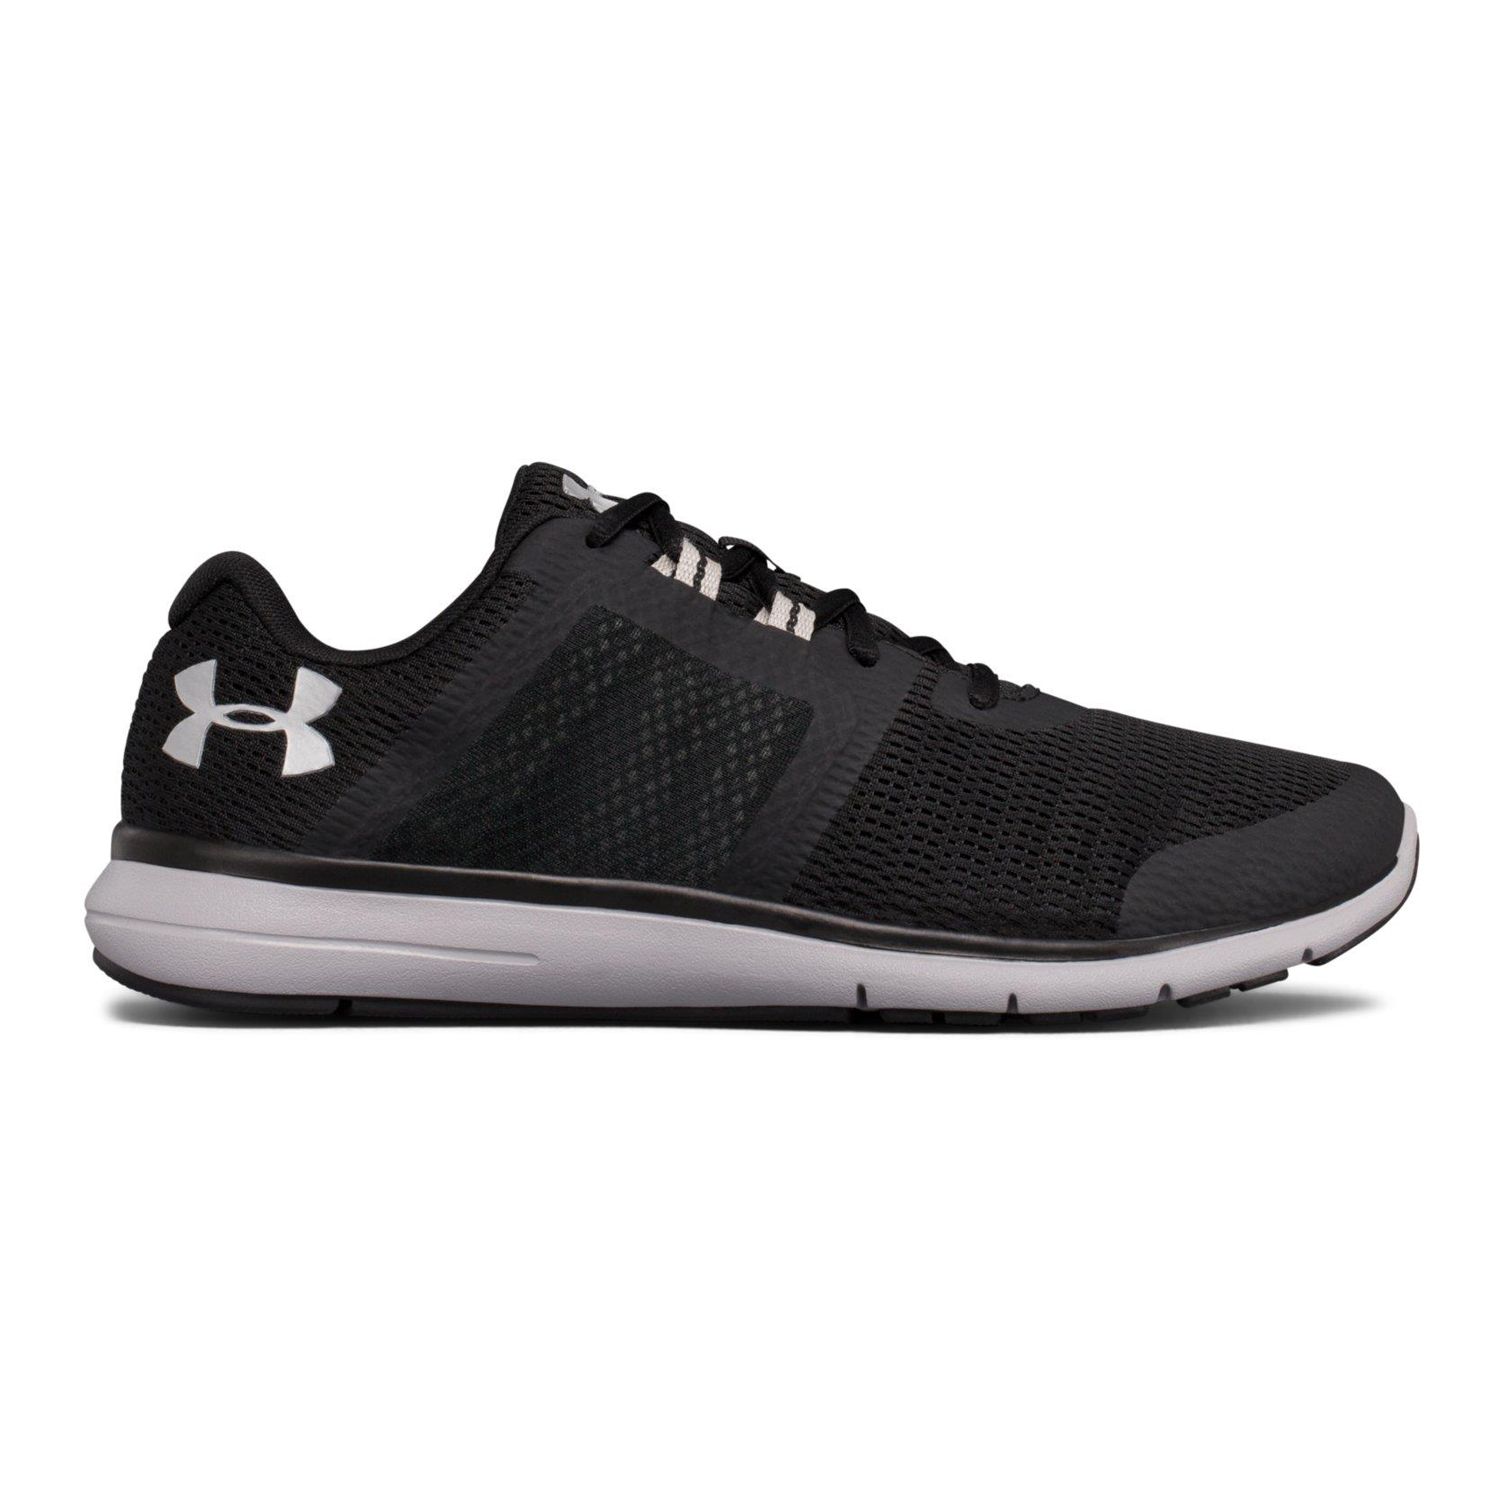 Under Armour Fuse FST Men's Running Shoes